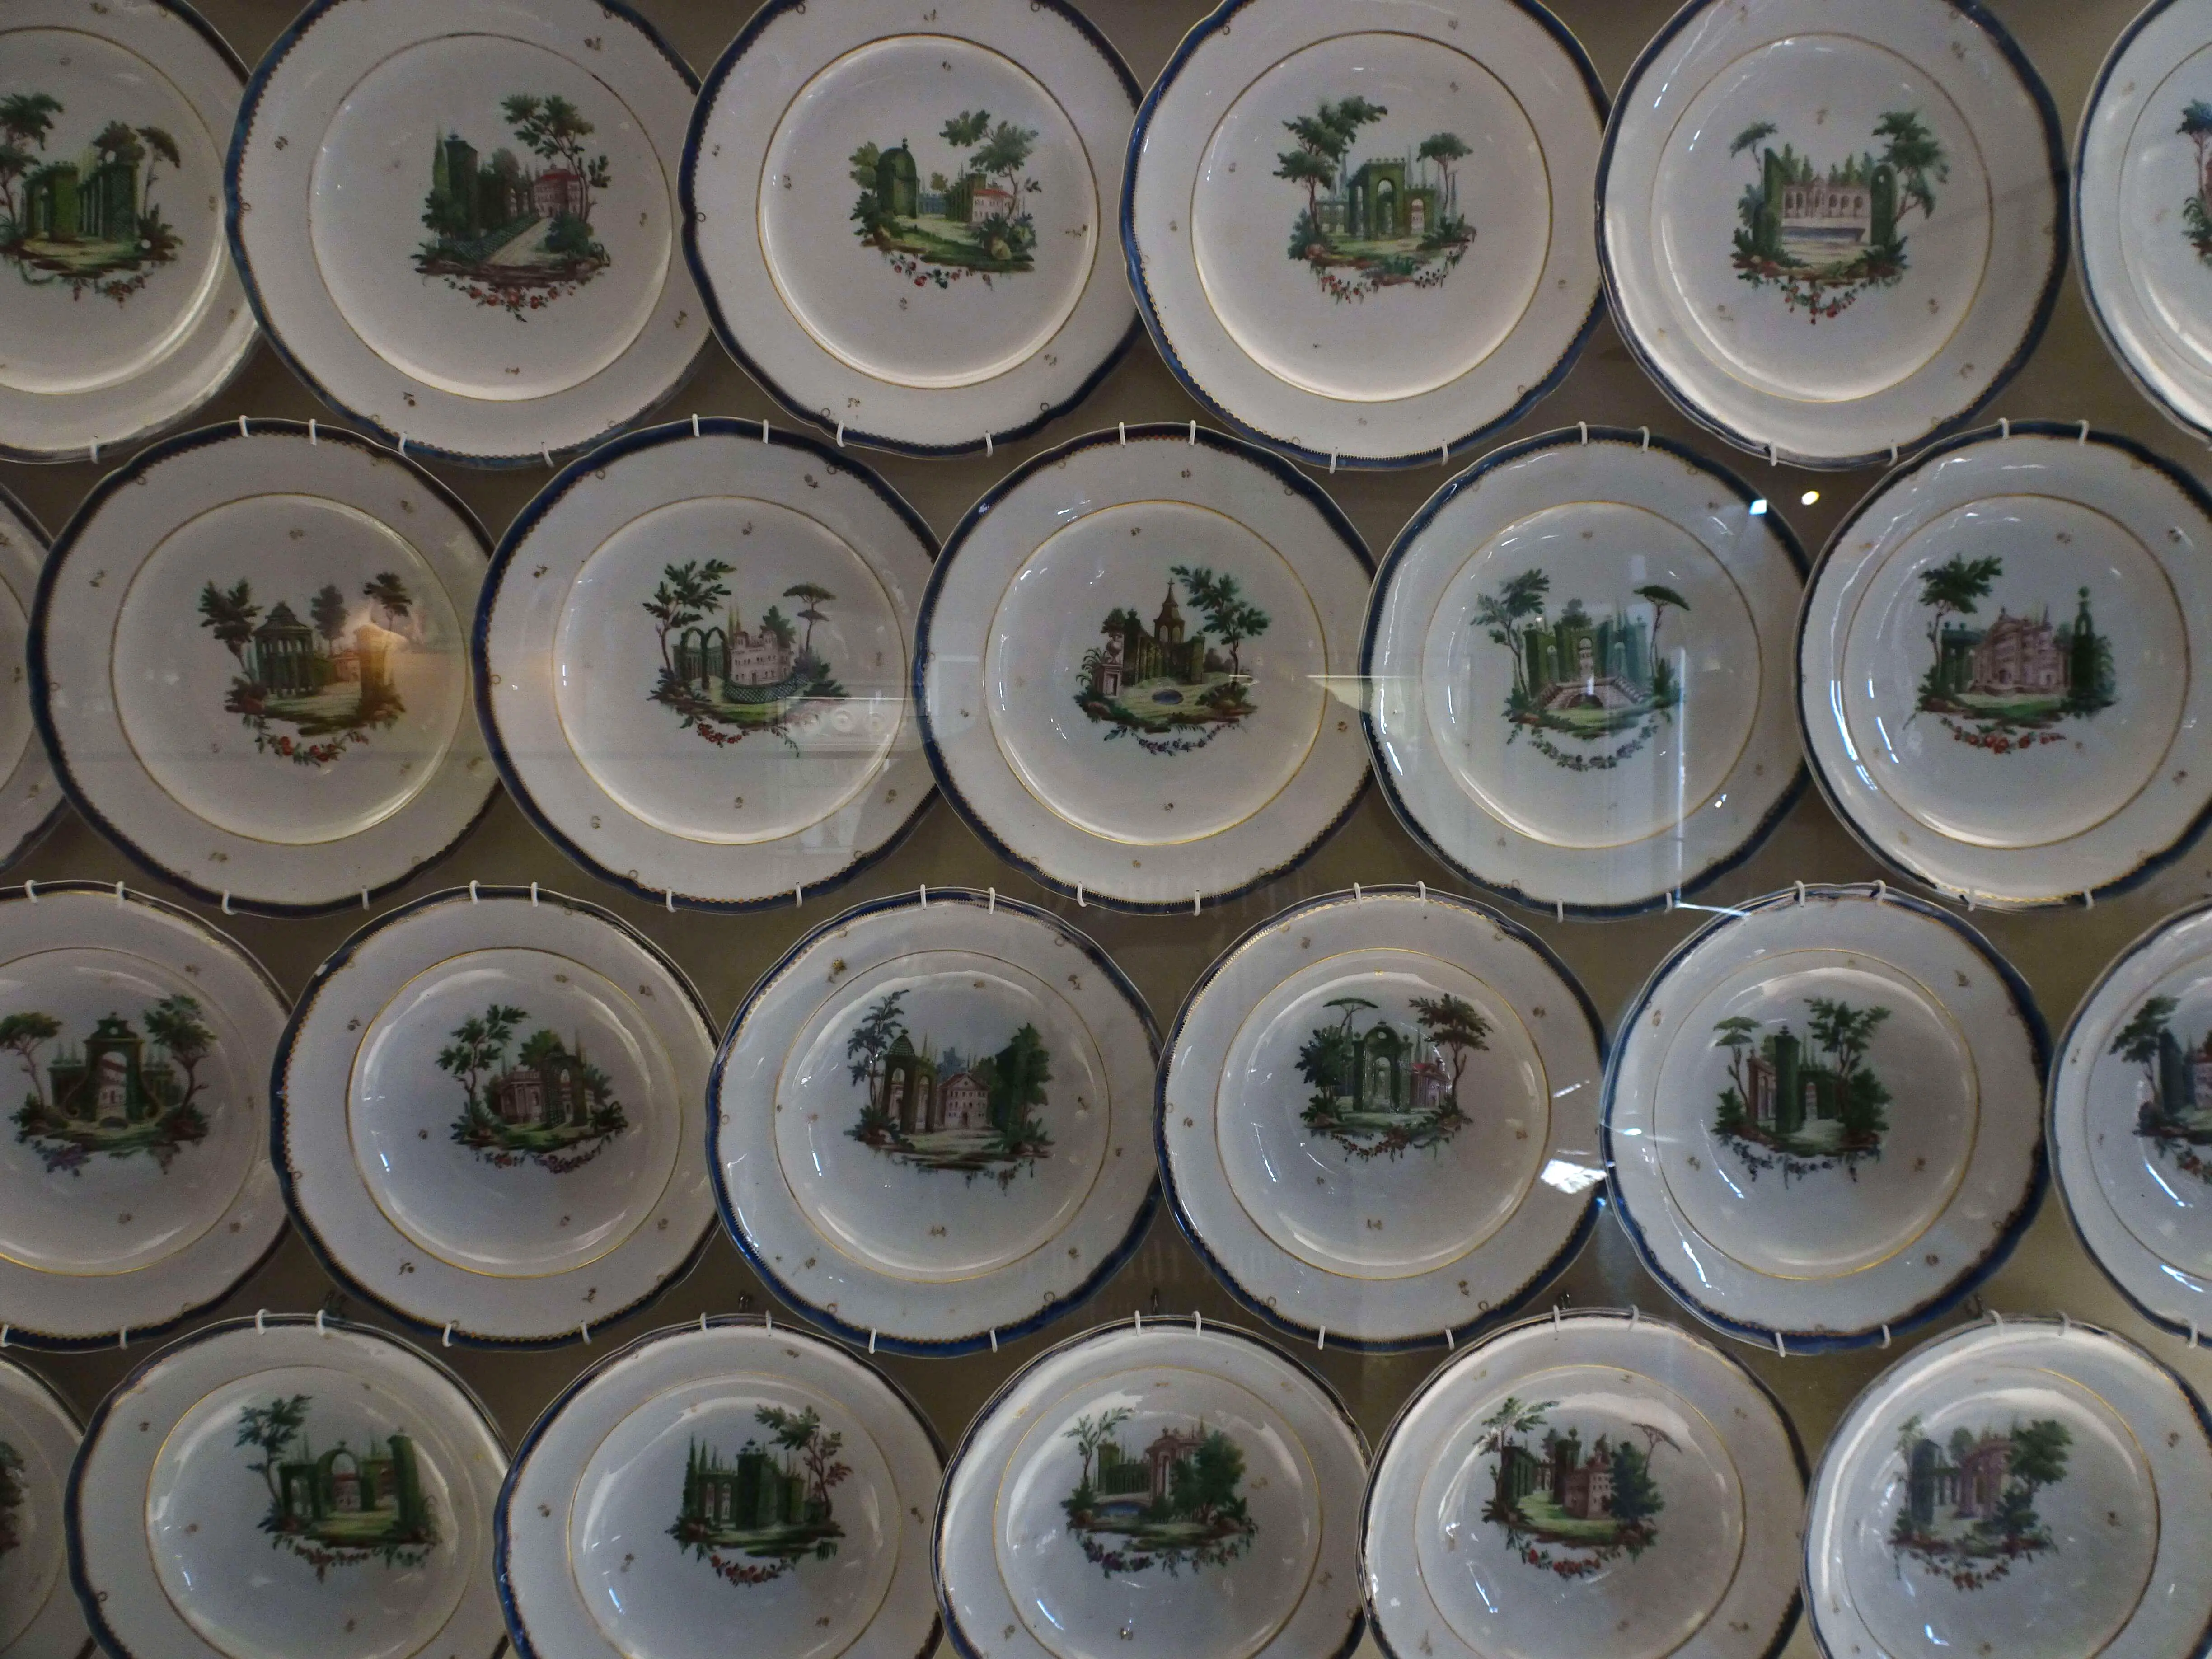 A glass display of ceramic plates